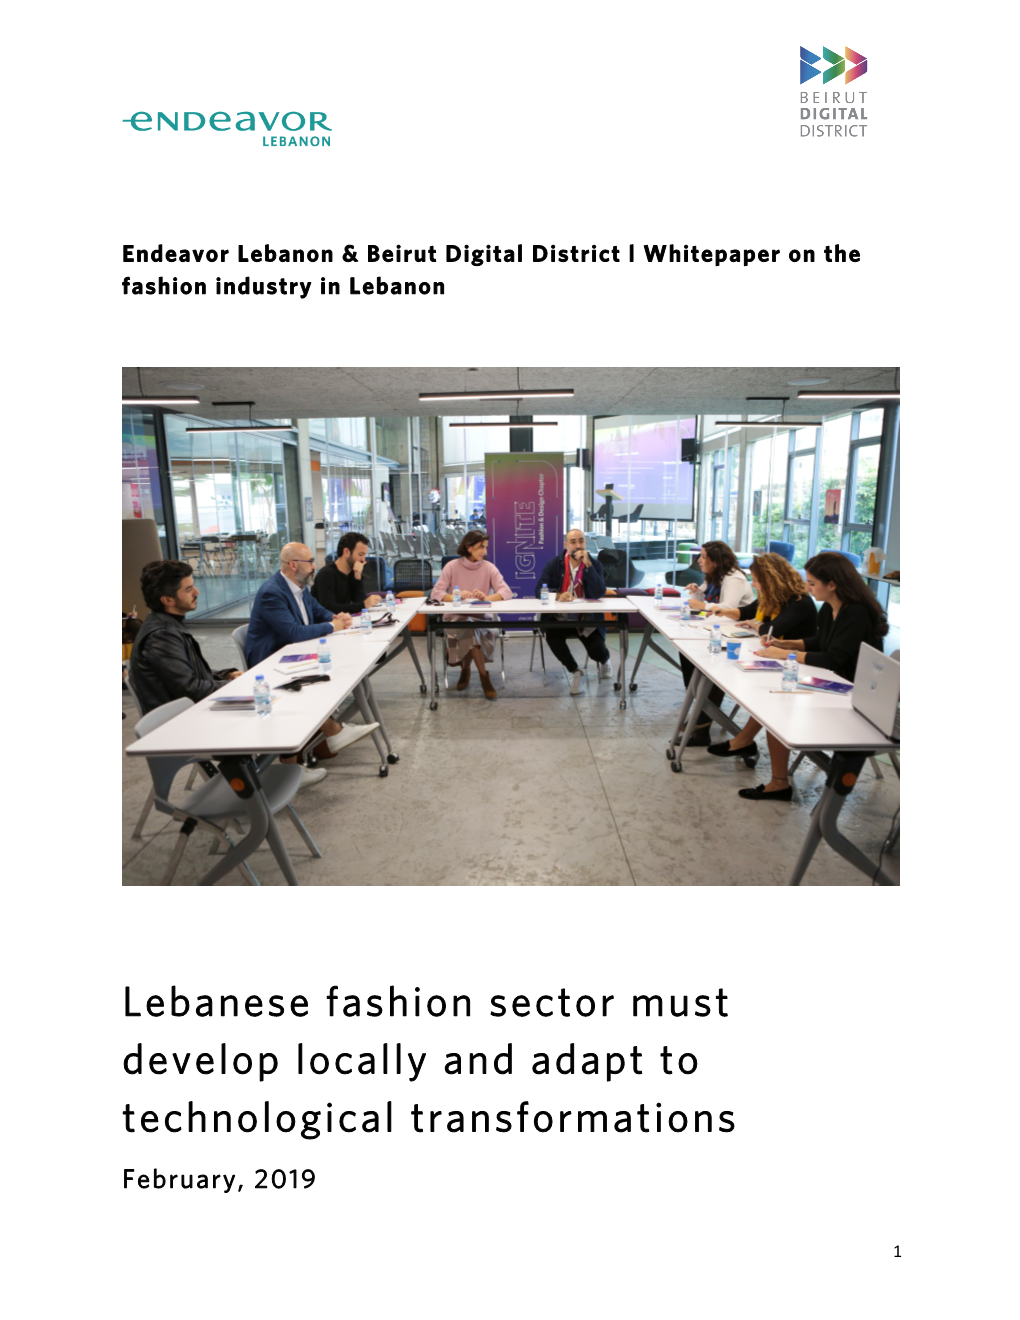 Lebanese Fashion Sector Must Develop Locally and Adapt to Technological Transformations February, 2019